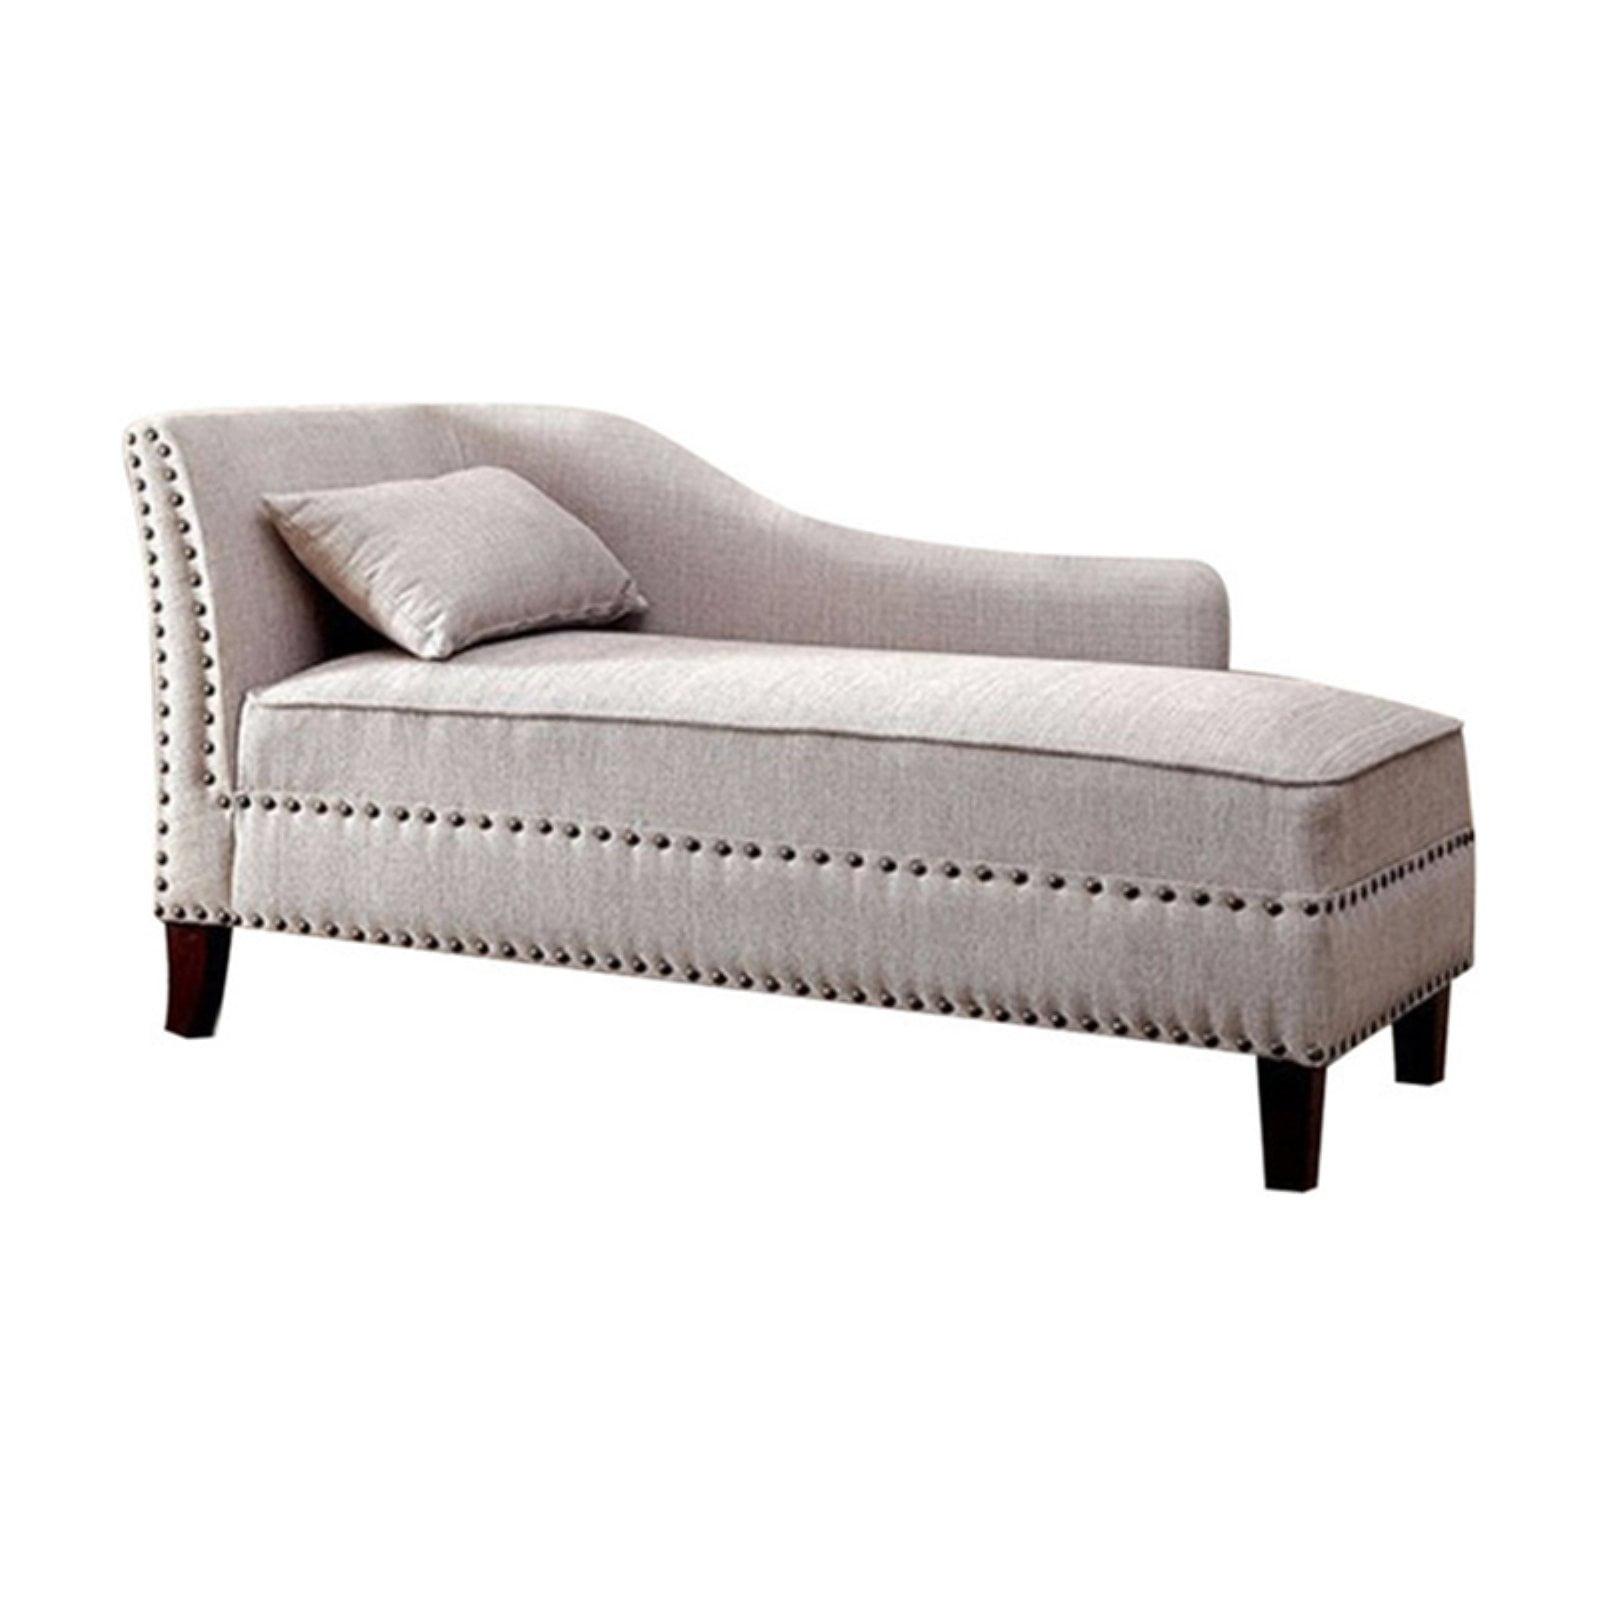 Elegant Beige Linen and Wood Chaise Lounge with Nailhead Accents